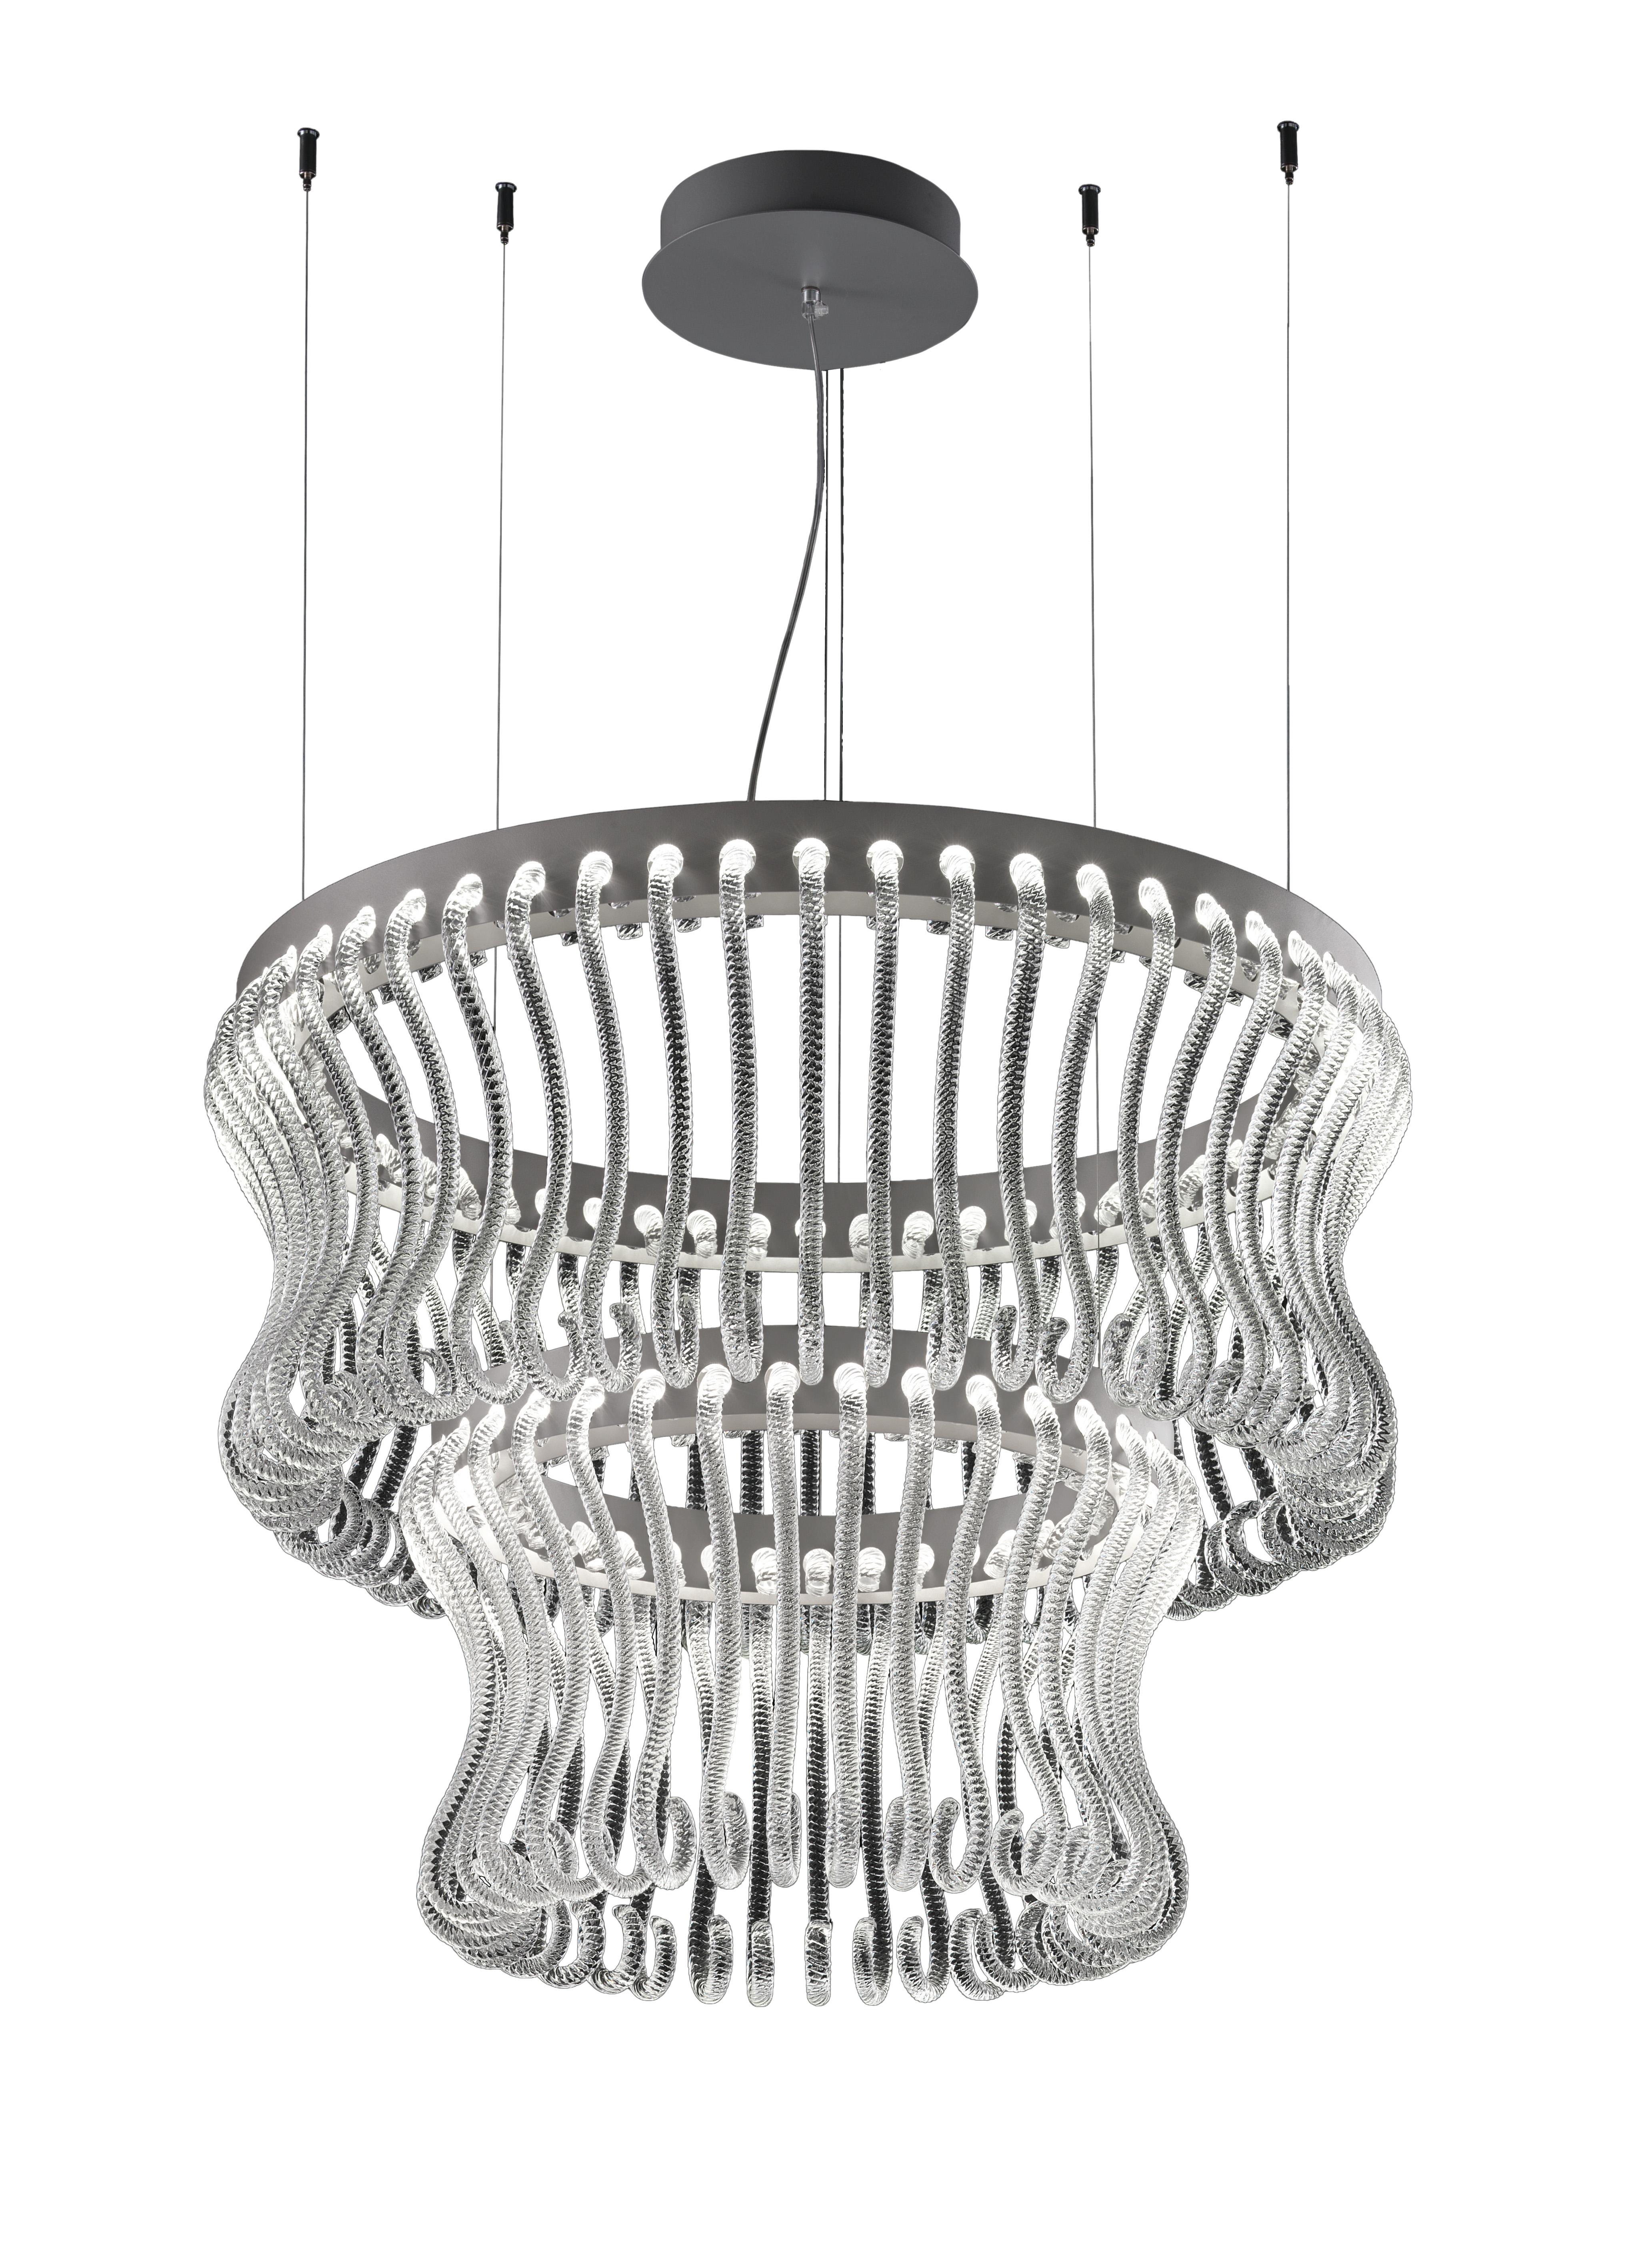 Crown 7337 Suspension Lamp in Glass, by Brian Rasmussen from Barovier&Toso